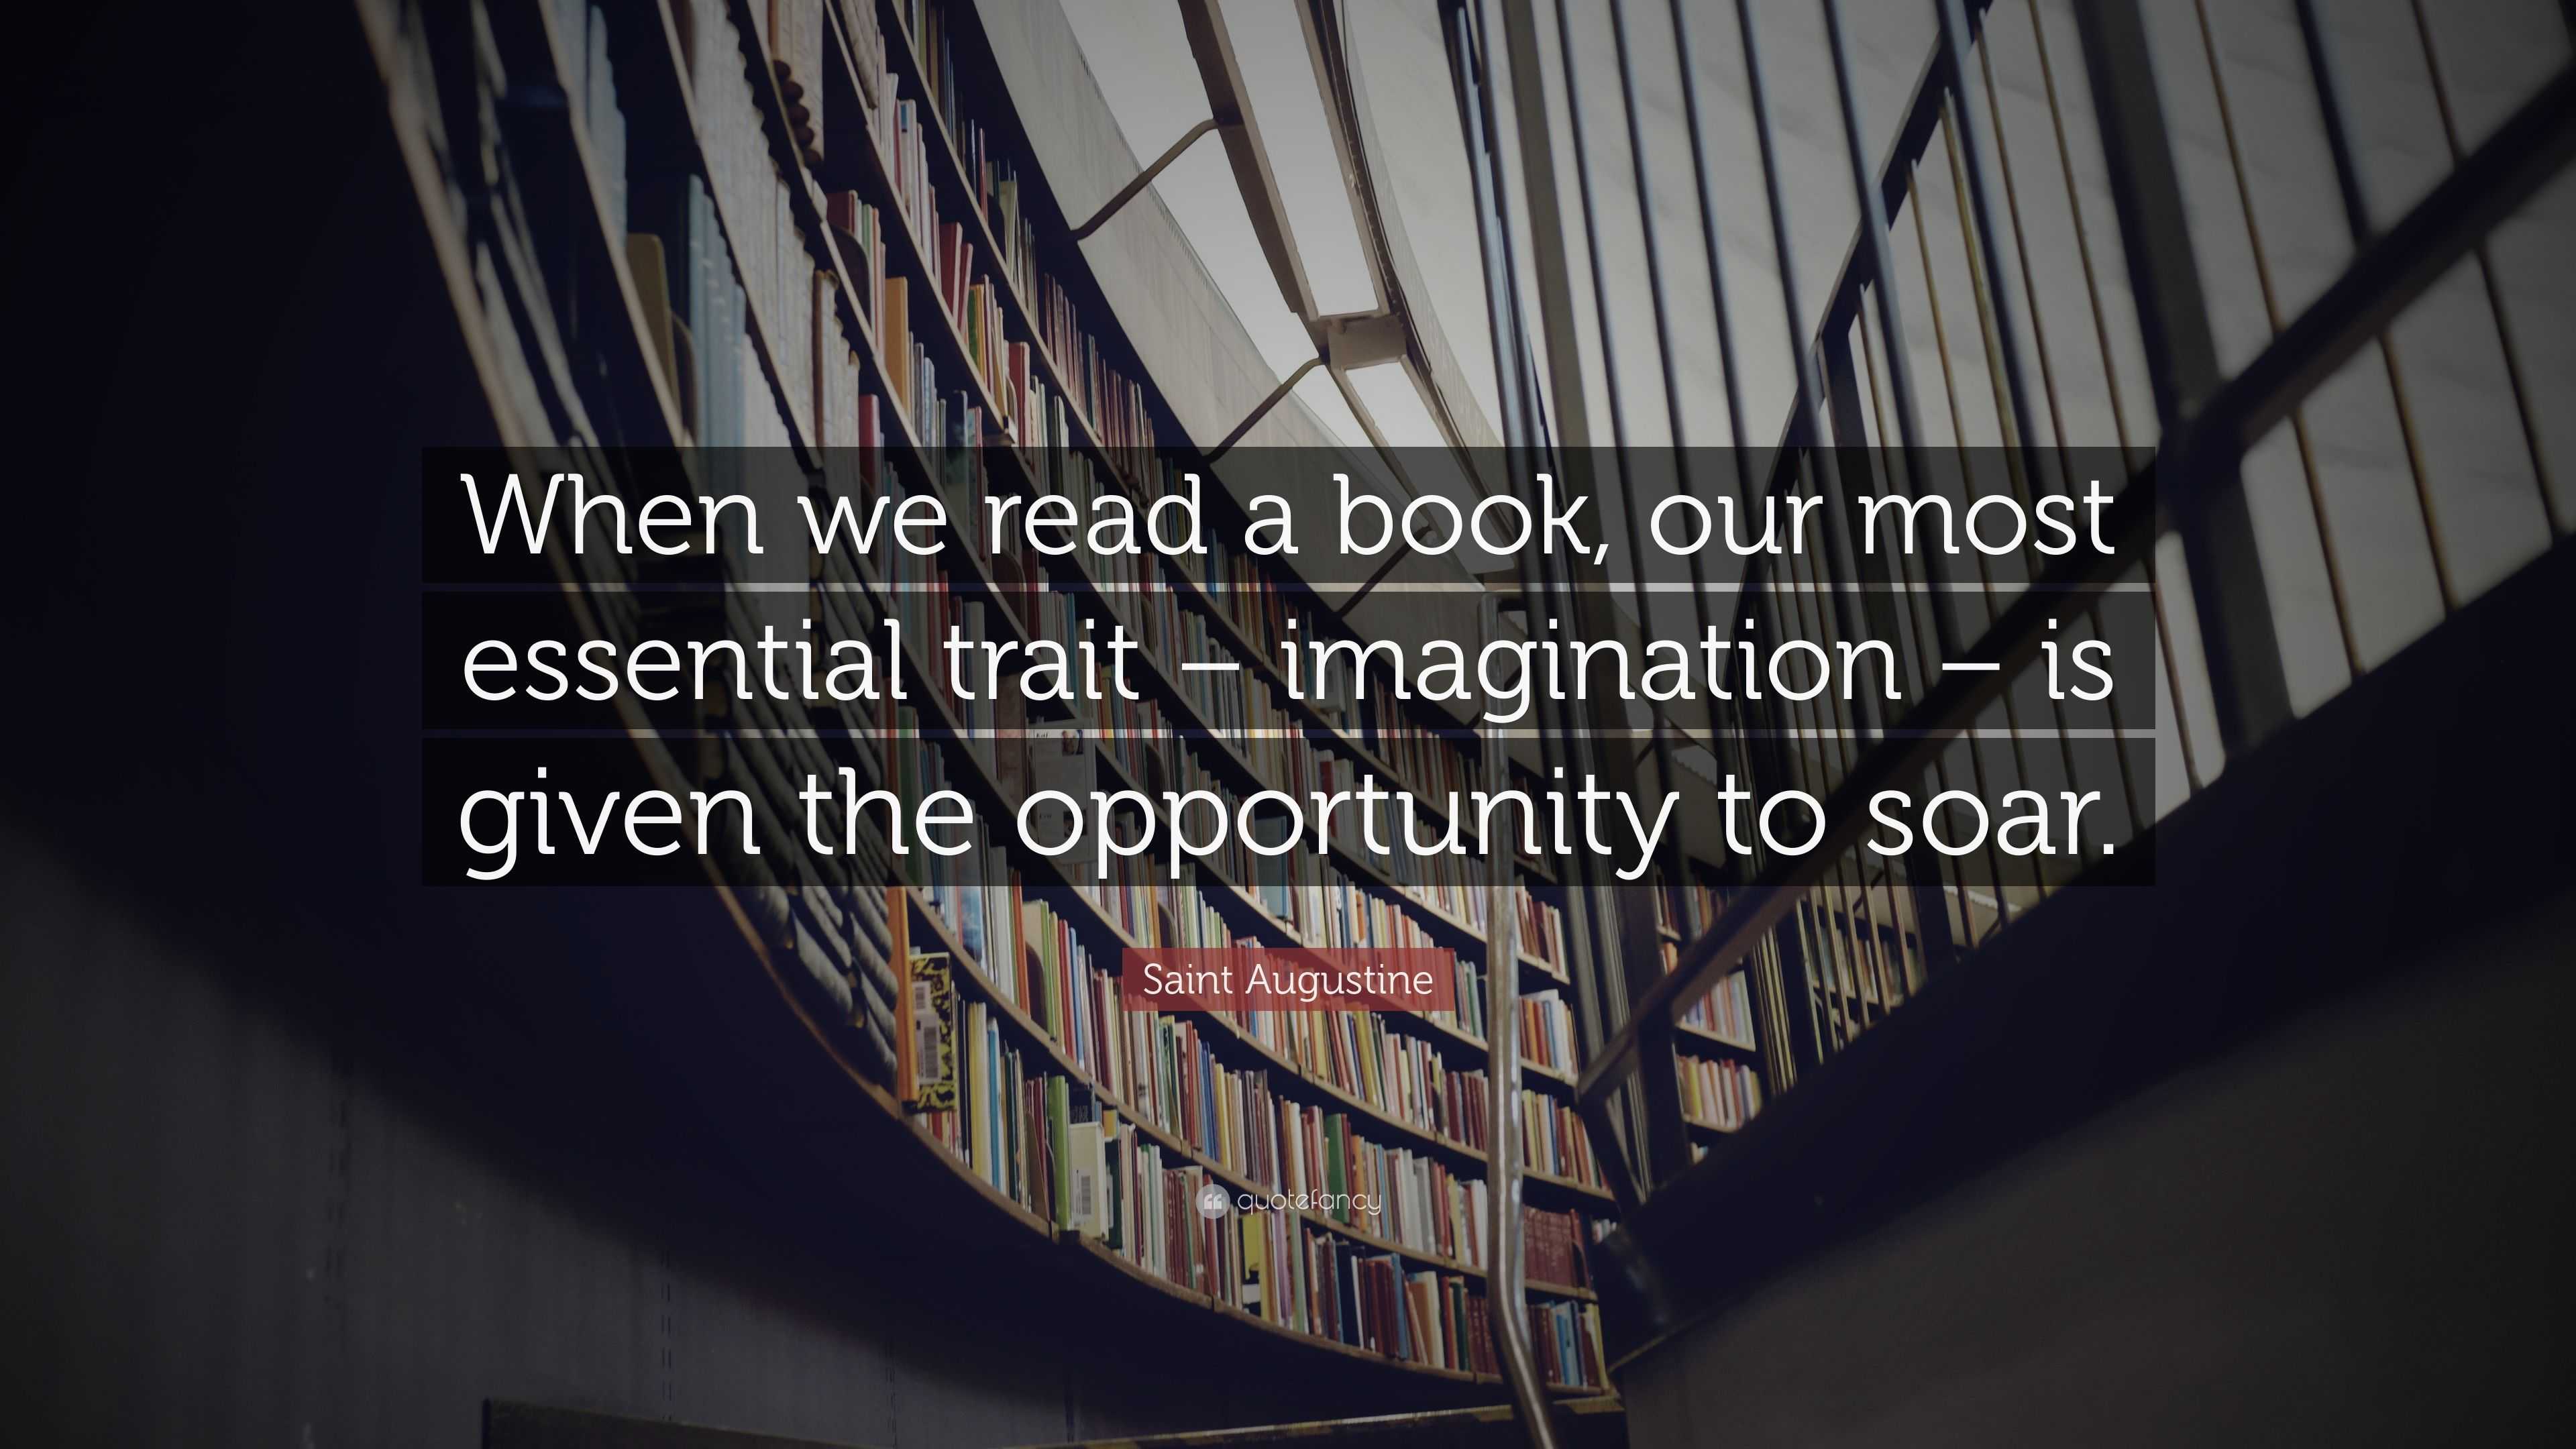 Saint Augustine Quote: “When we read a book, our most essential trait ...